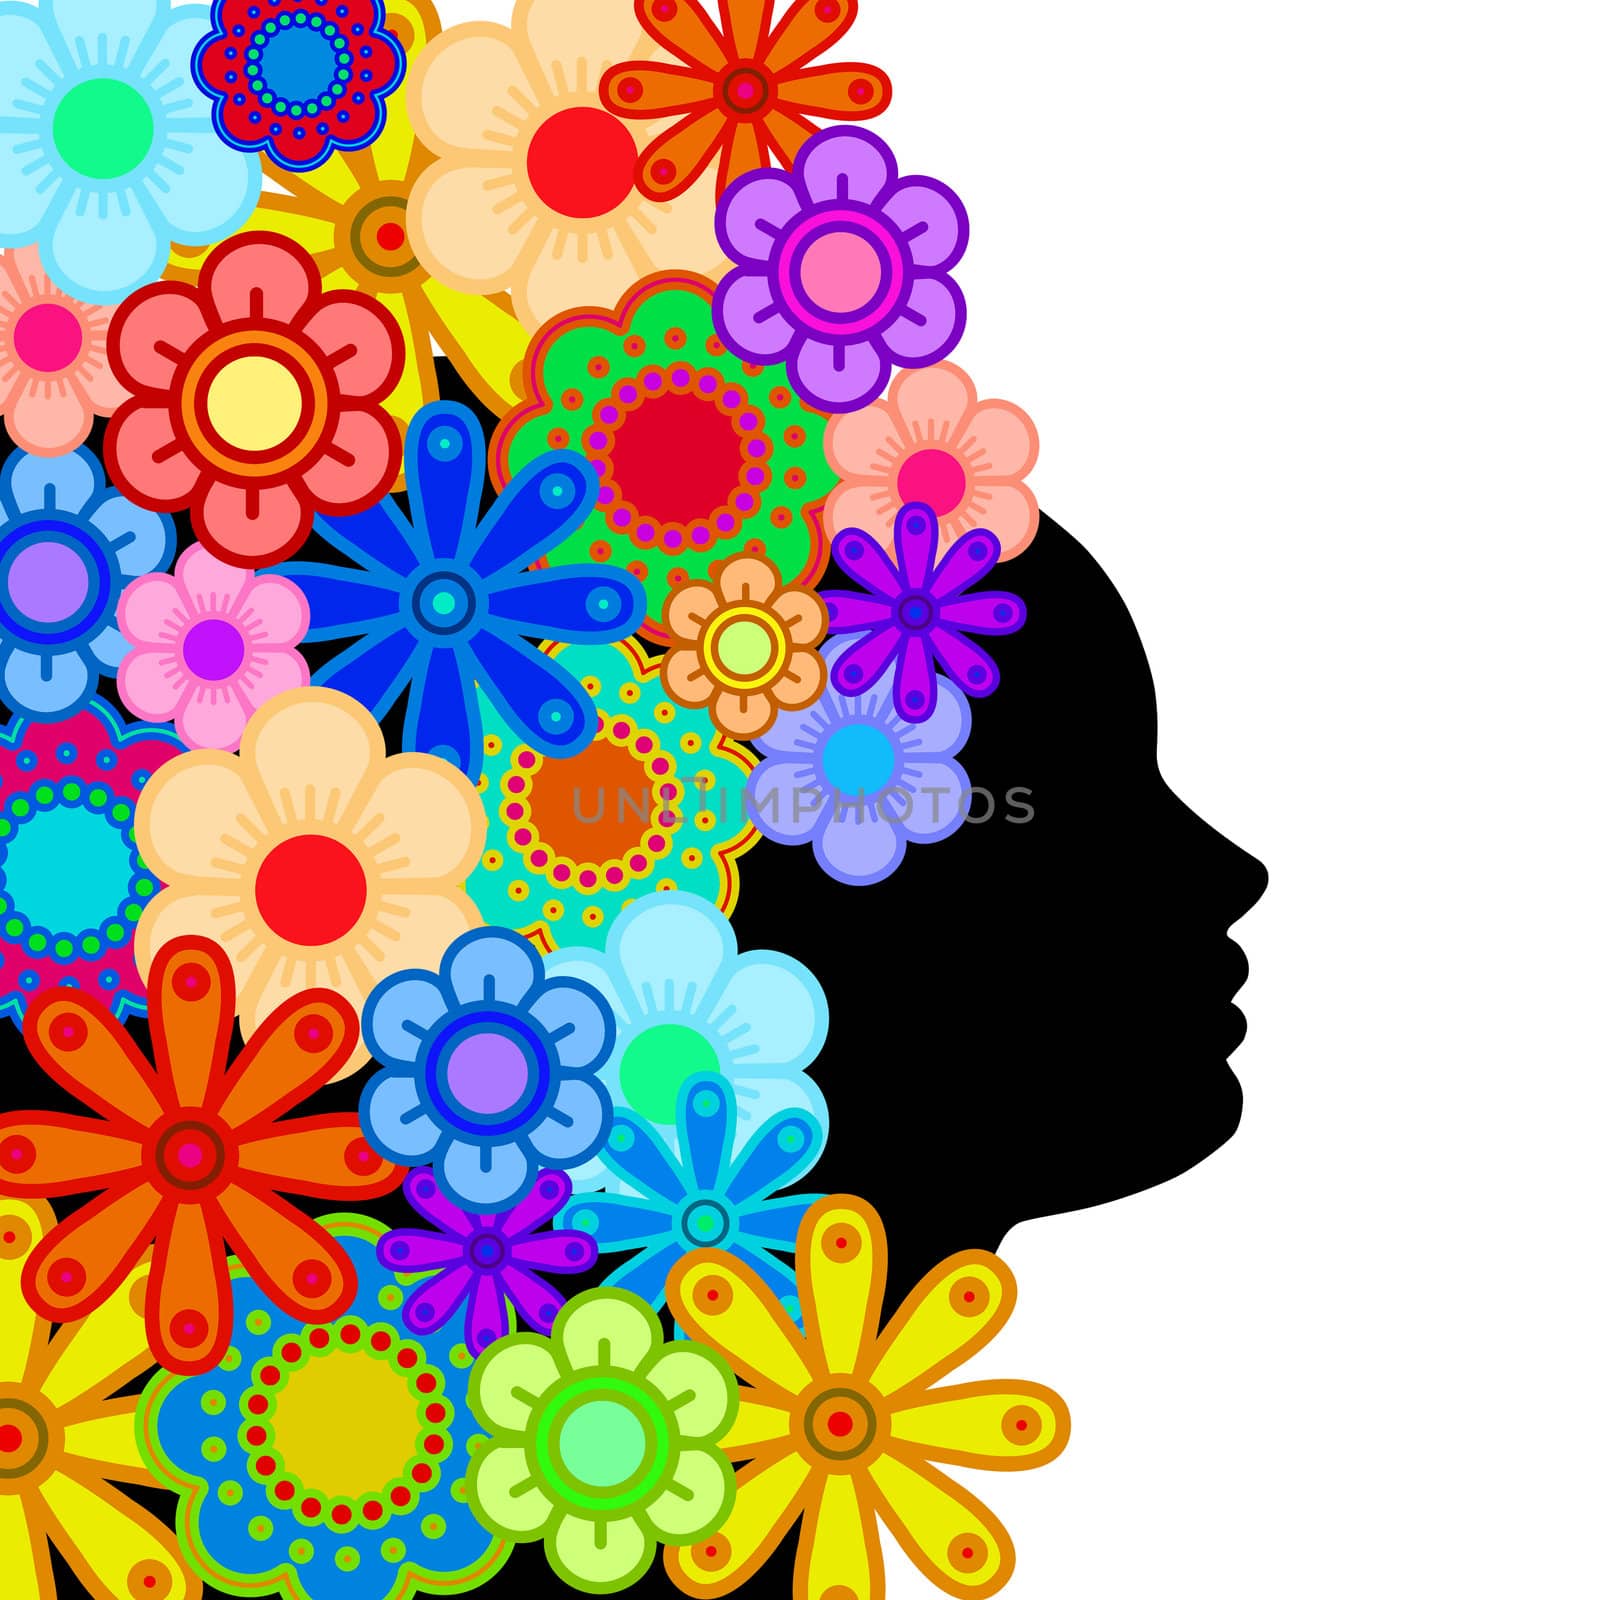 Woman Face Silhouette with Hair of Colorful Flowers Abstract Illustration